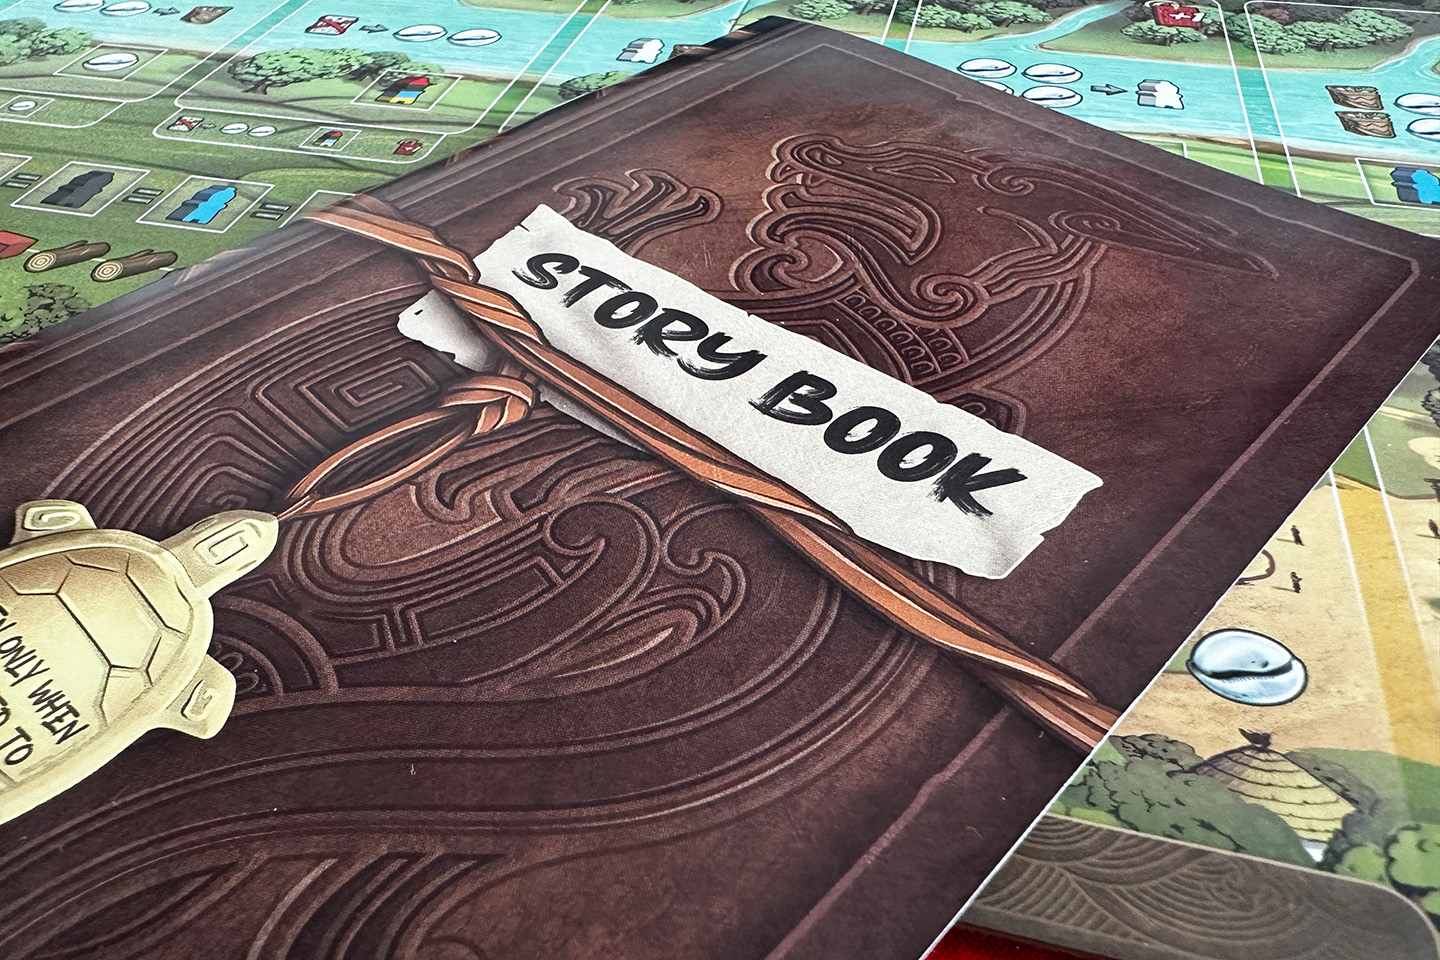 The separate story book contains all the campaign content.